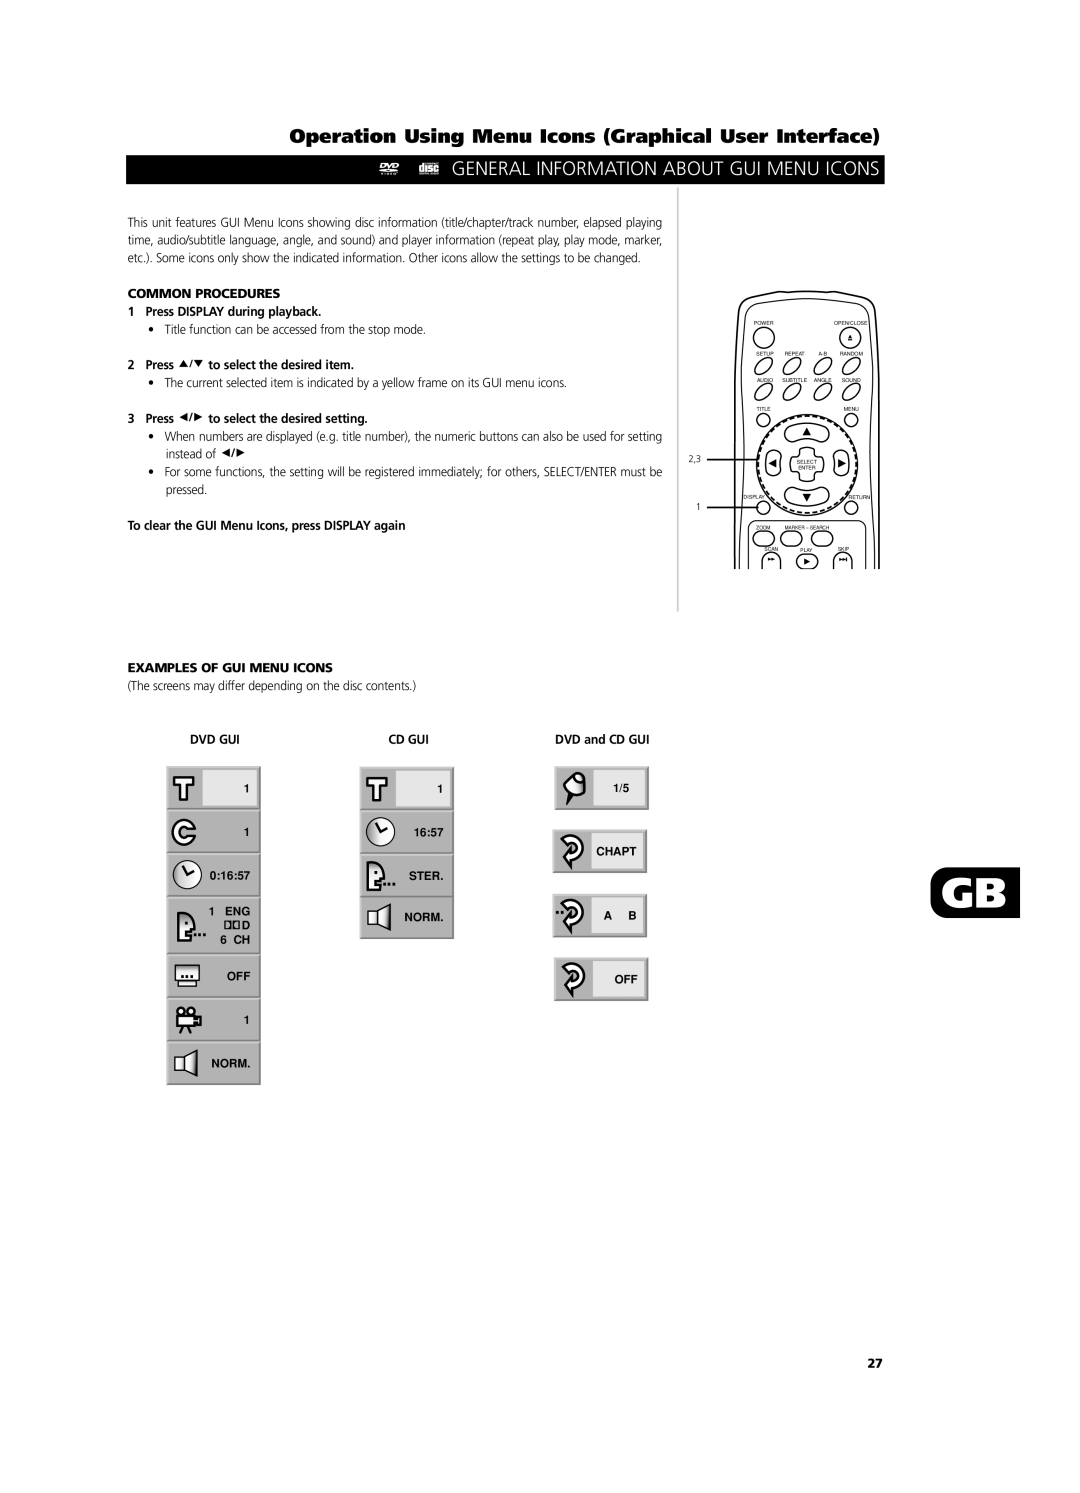 NAD T531 owner manual General Information About Gui Menu Icons, COMMON PROCEDURES 1Press DISPLAY during playback, Dvd Gui 